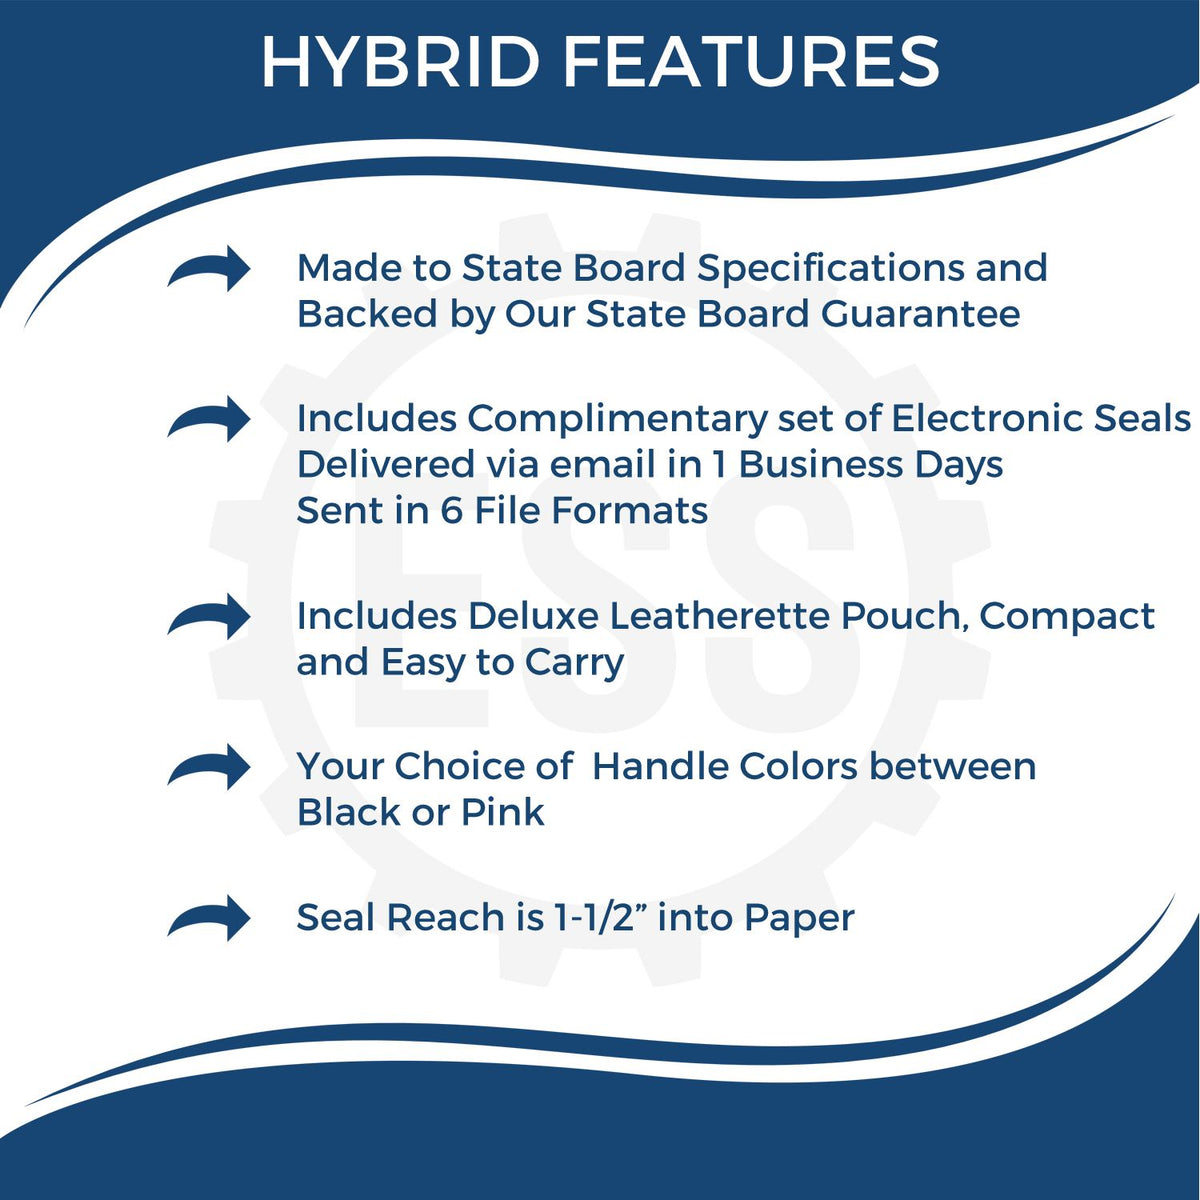 A picture of an infographic highlighting the selling points for the Hybrid West Virginia Land Surveyor Seal